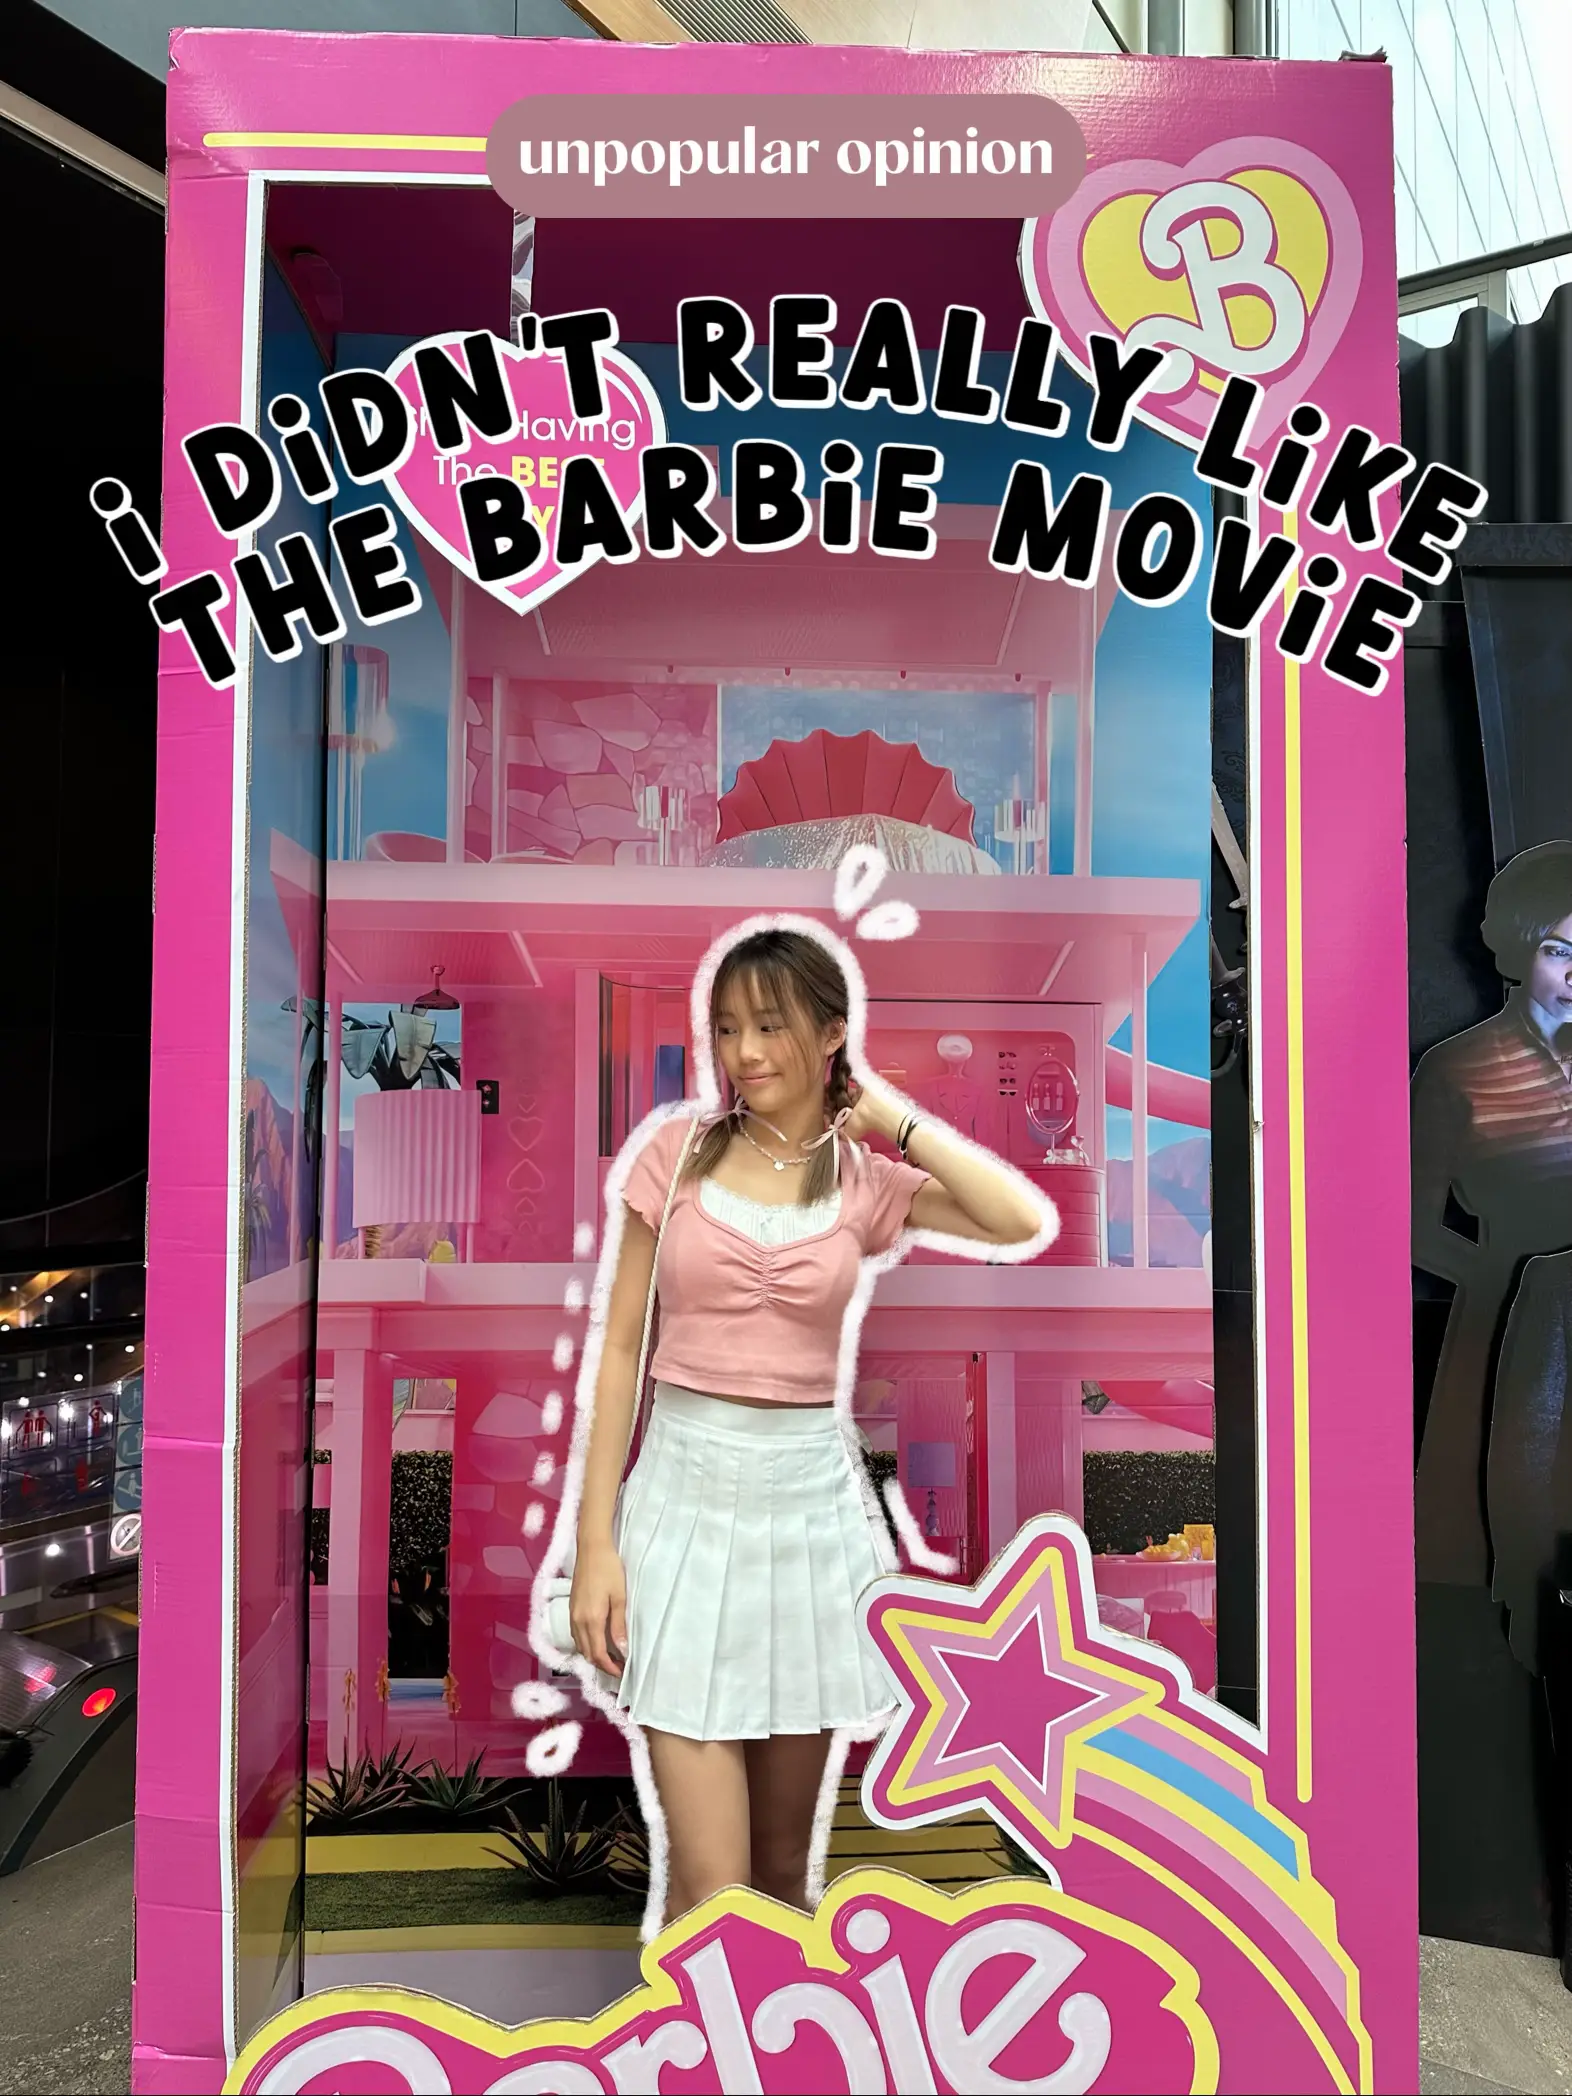 Is Barbie Dreamhouse worth it? My honest opinion and review of